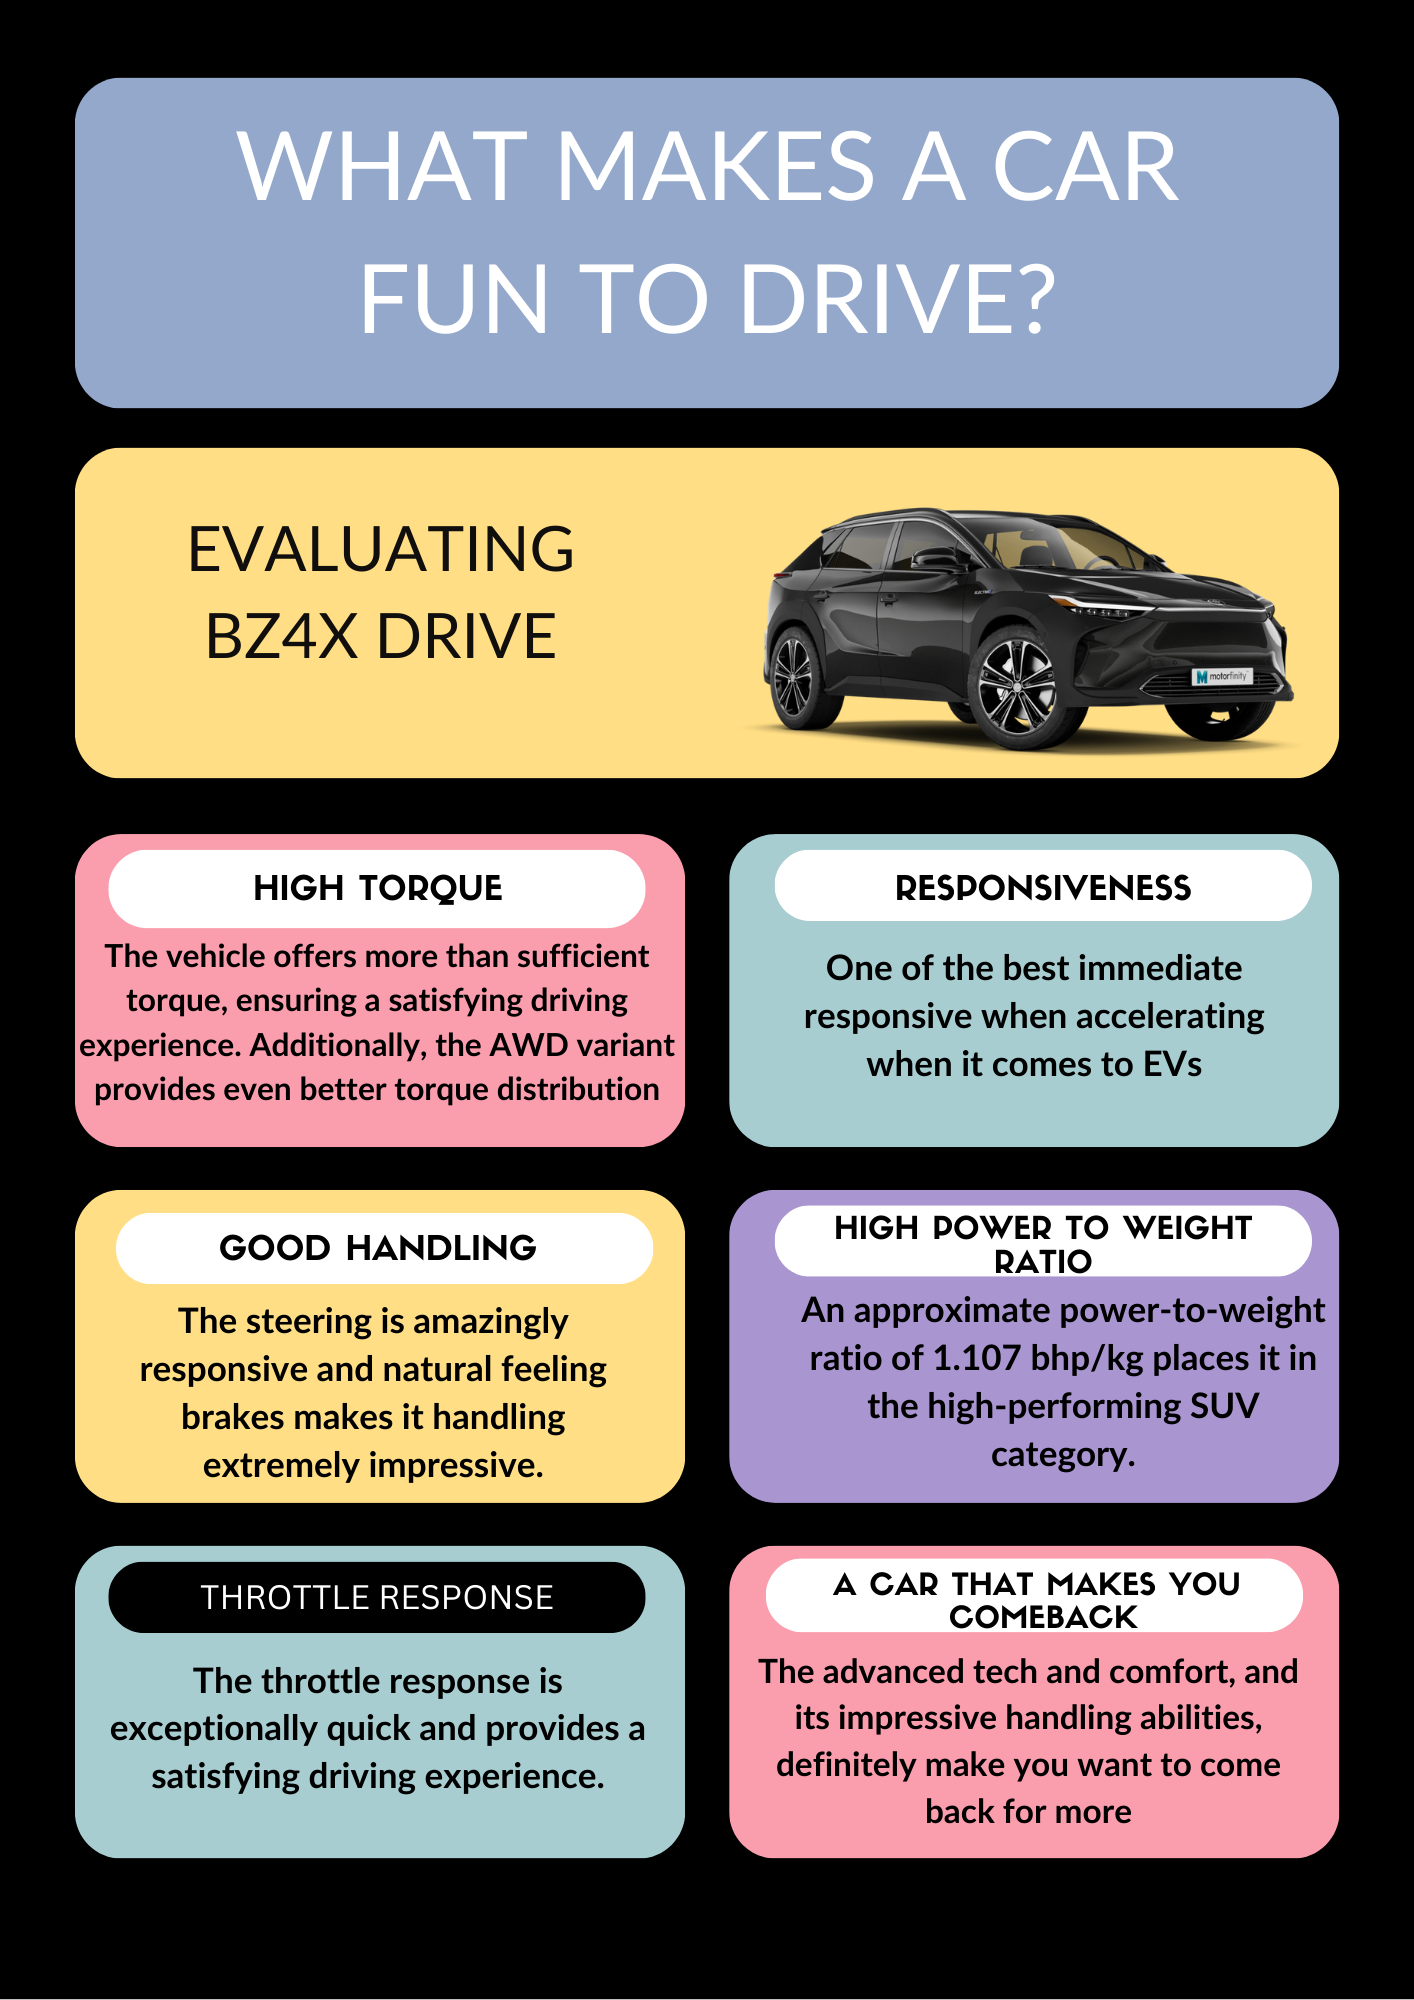 an infogrpahic based on motorfinity experts evaluating if bz4x a fun car to drive or not?